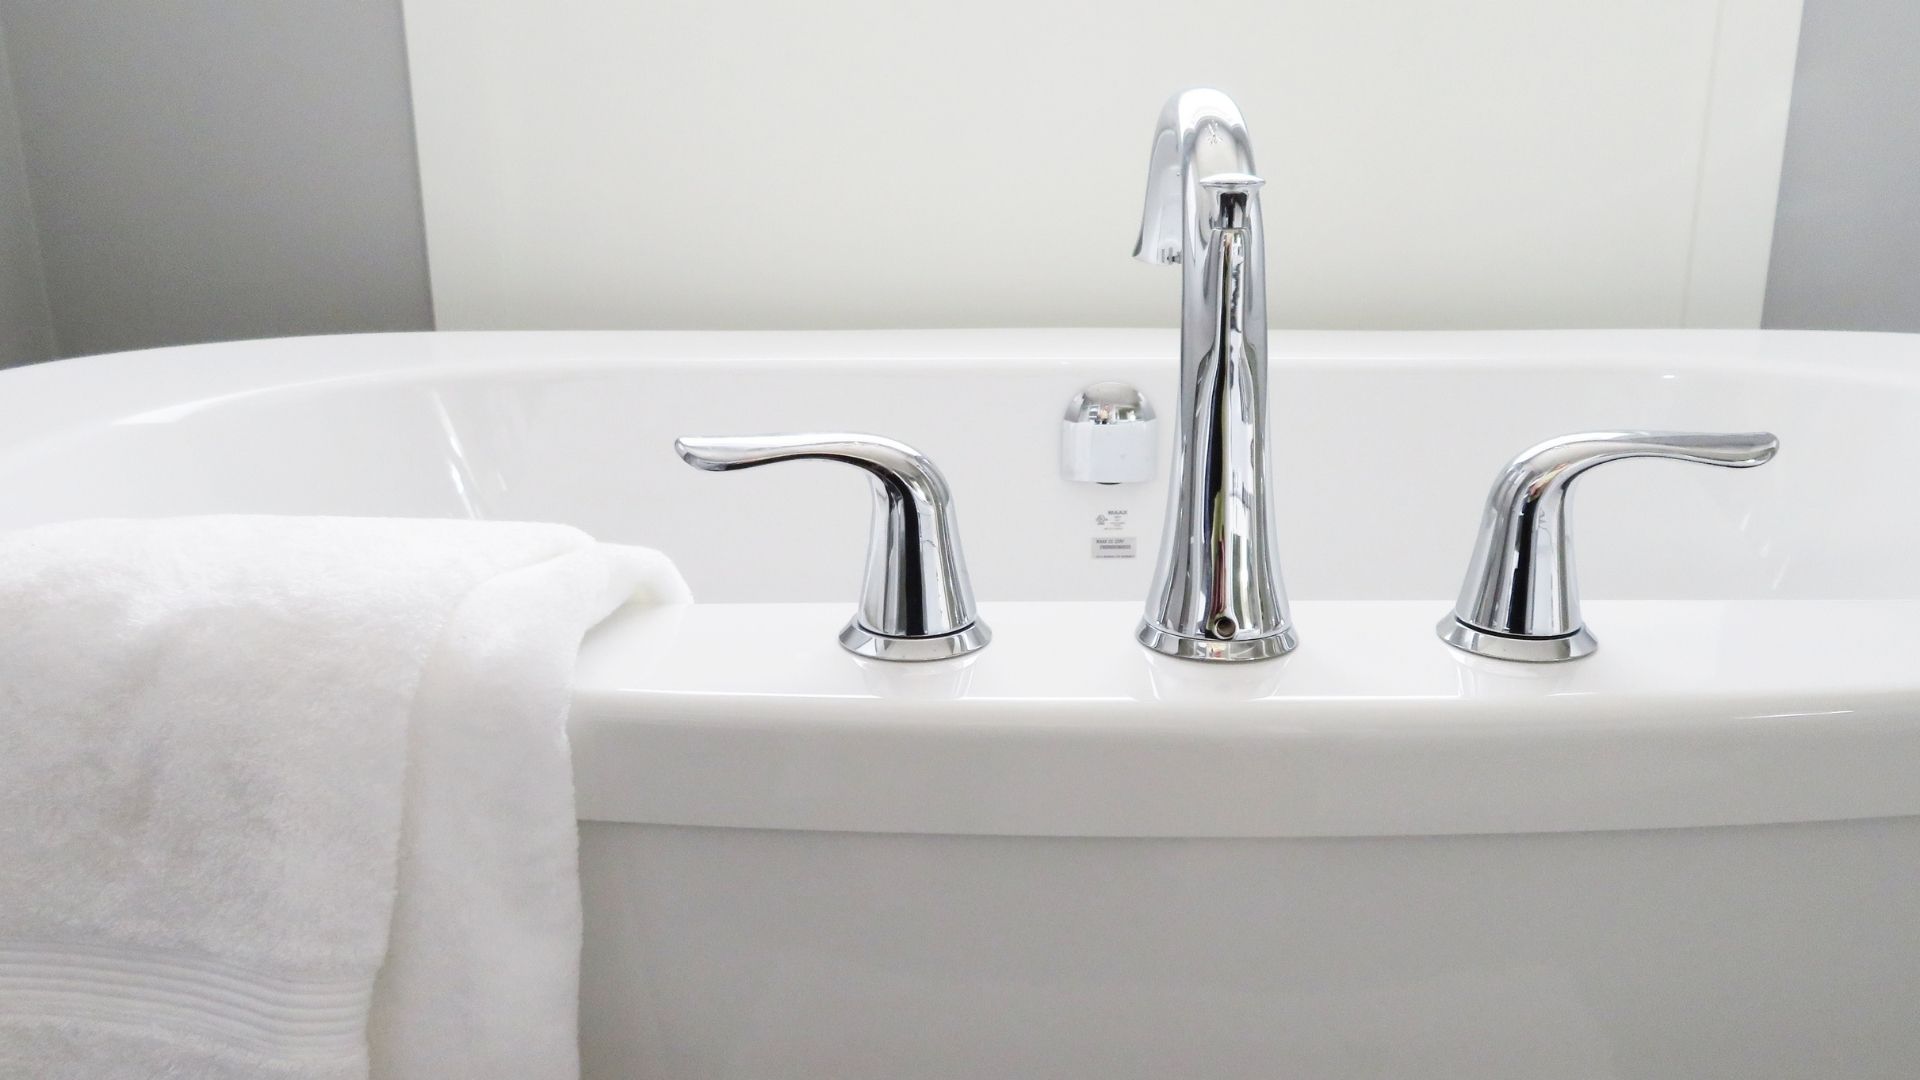 How To Clean a Bathtub and Get It White Again